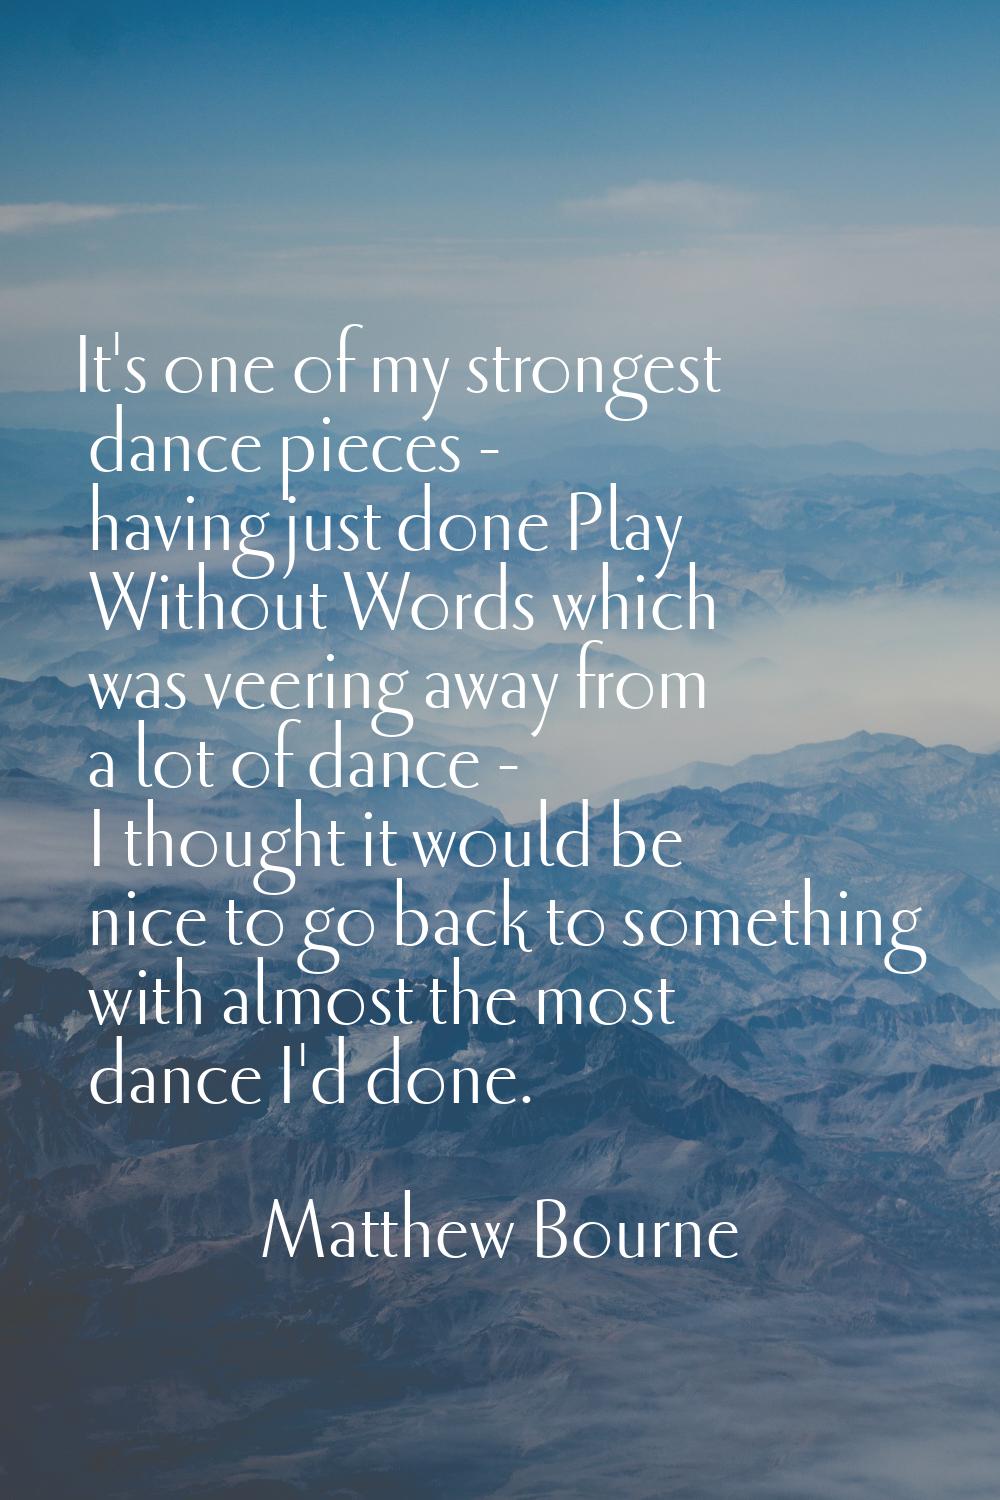 It's one of my strongest dance pieces - having just done Play Without Words which was veering away 